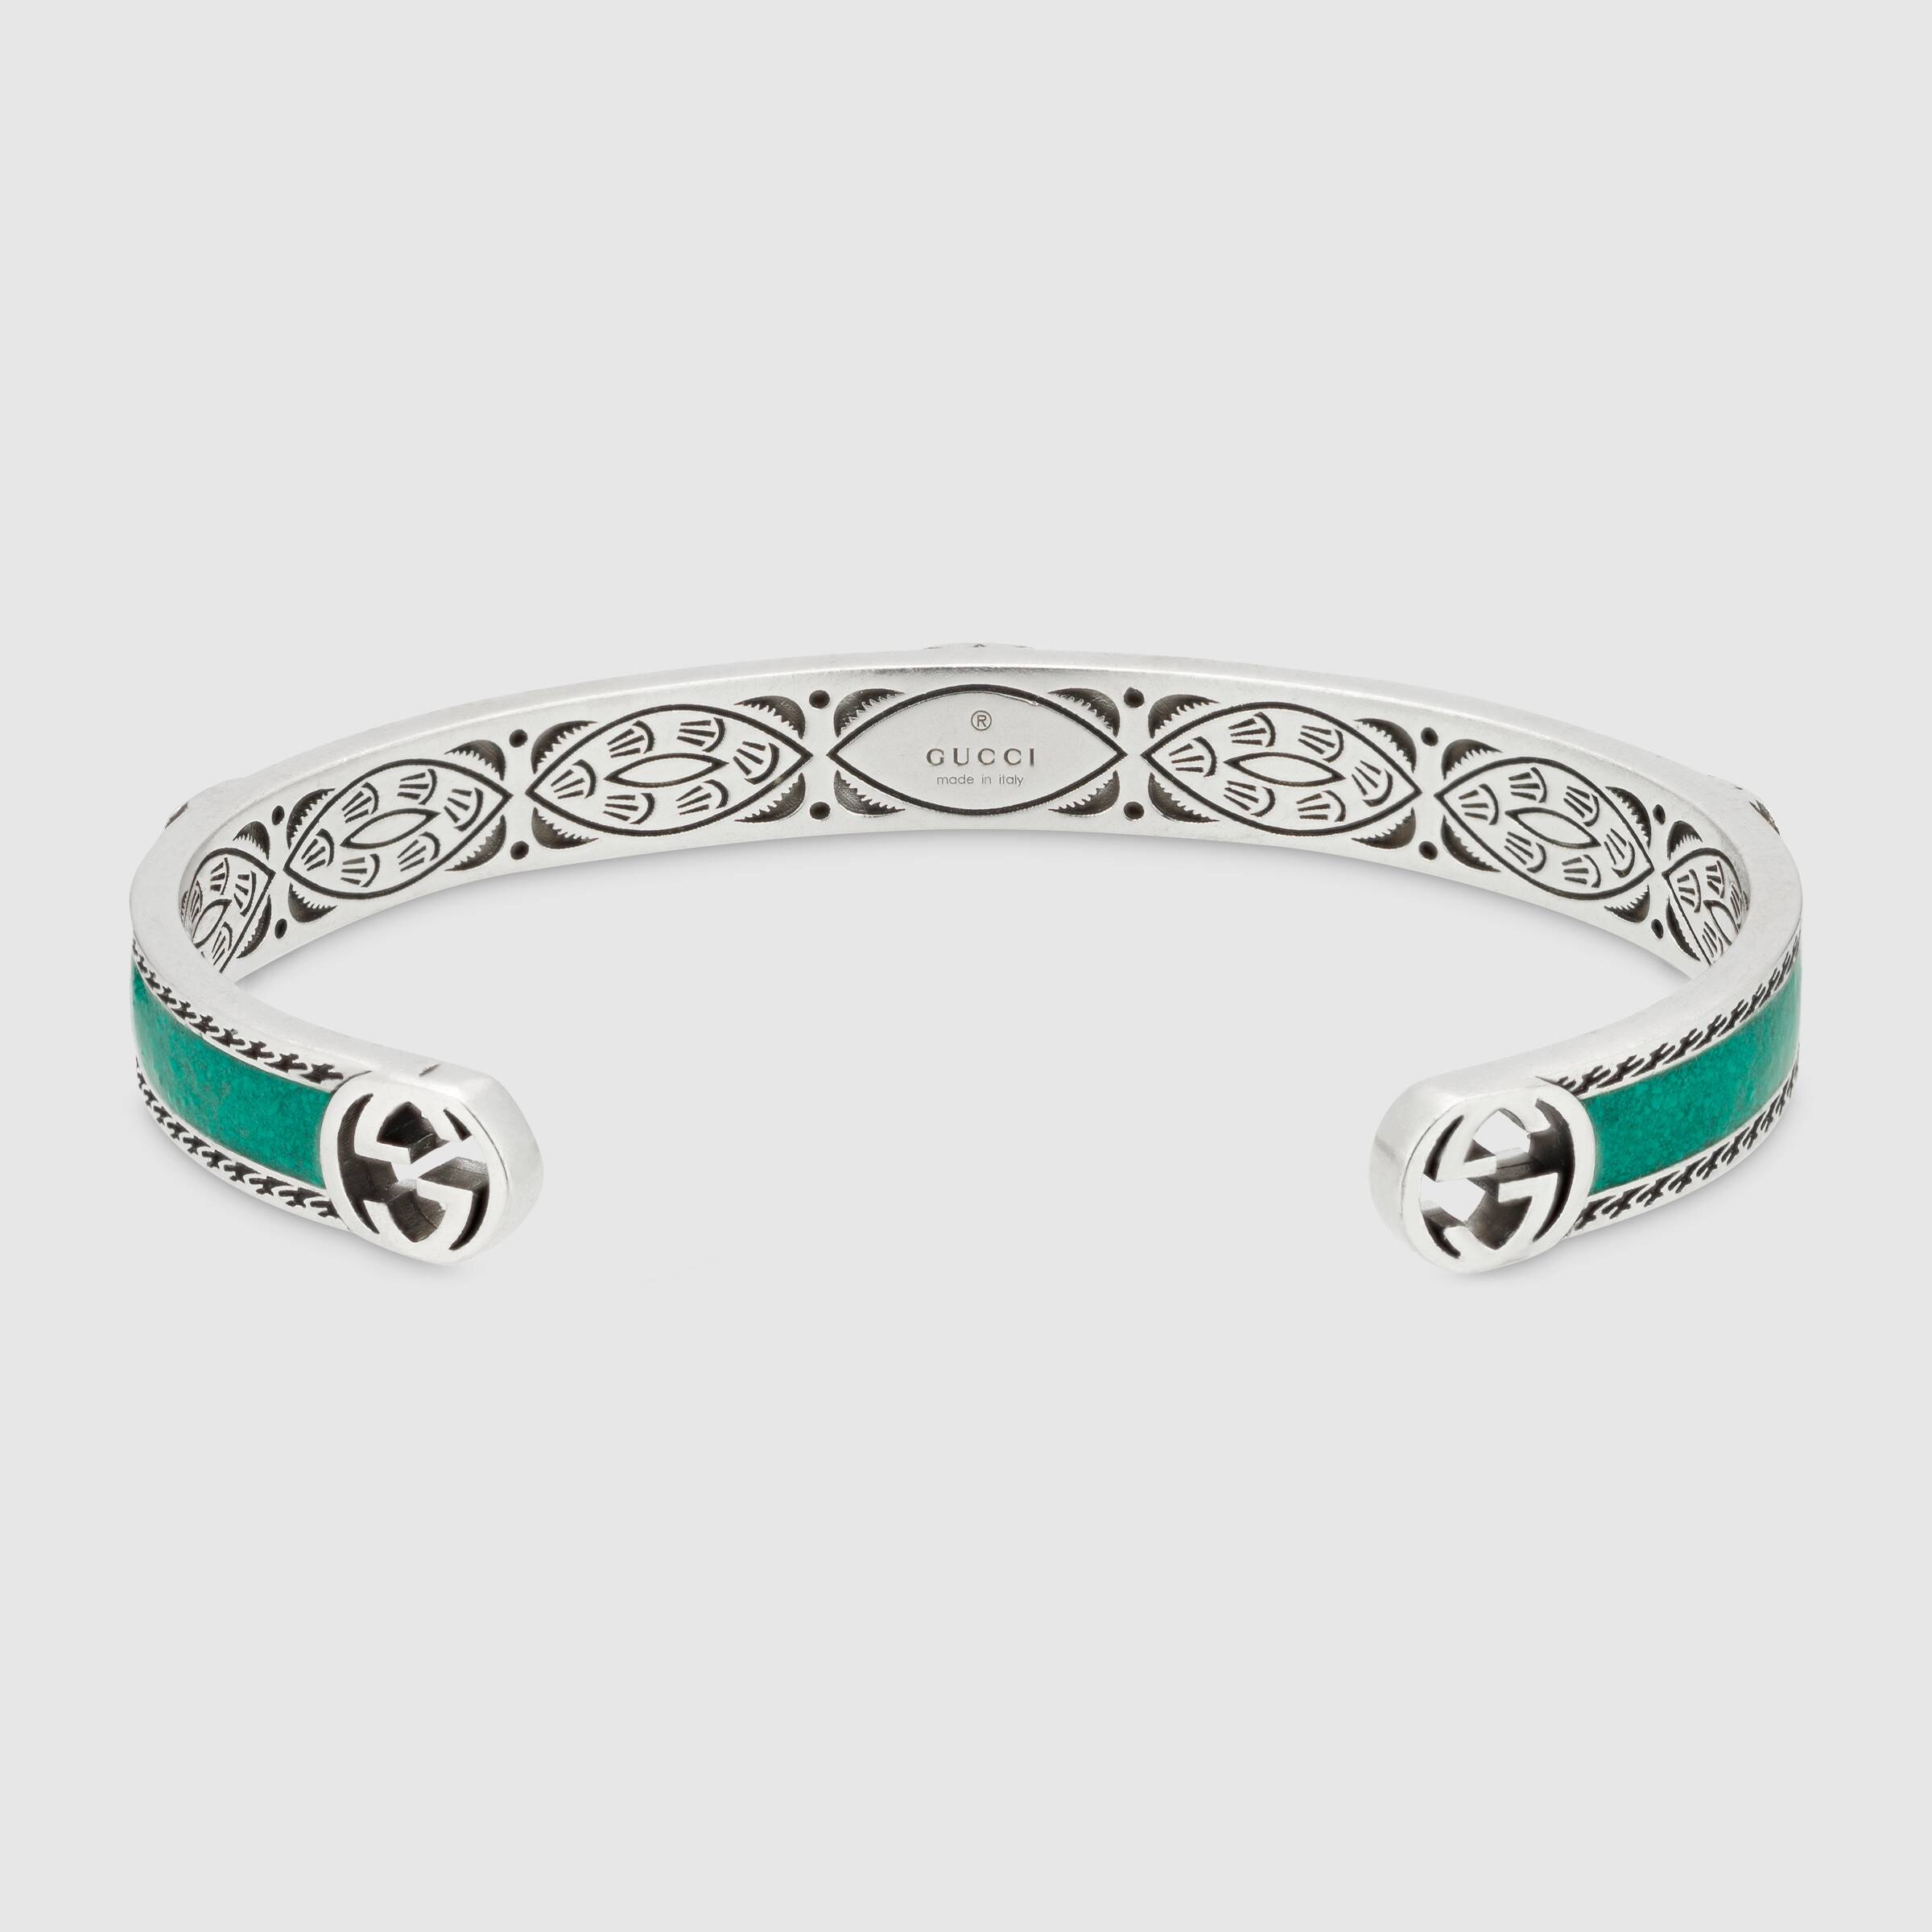 Gucci Silver Bangle with Turquoise Enamel